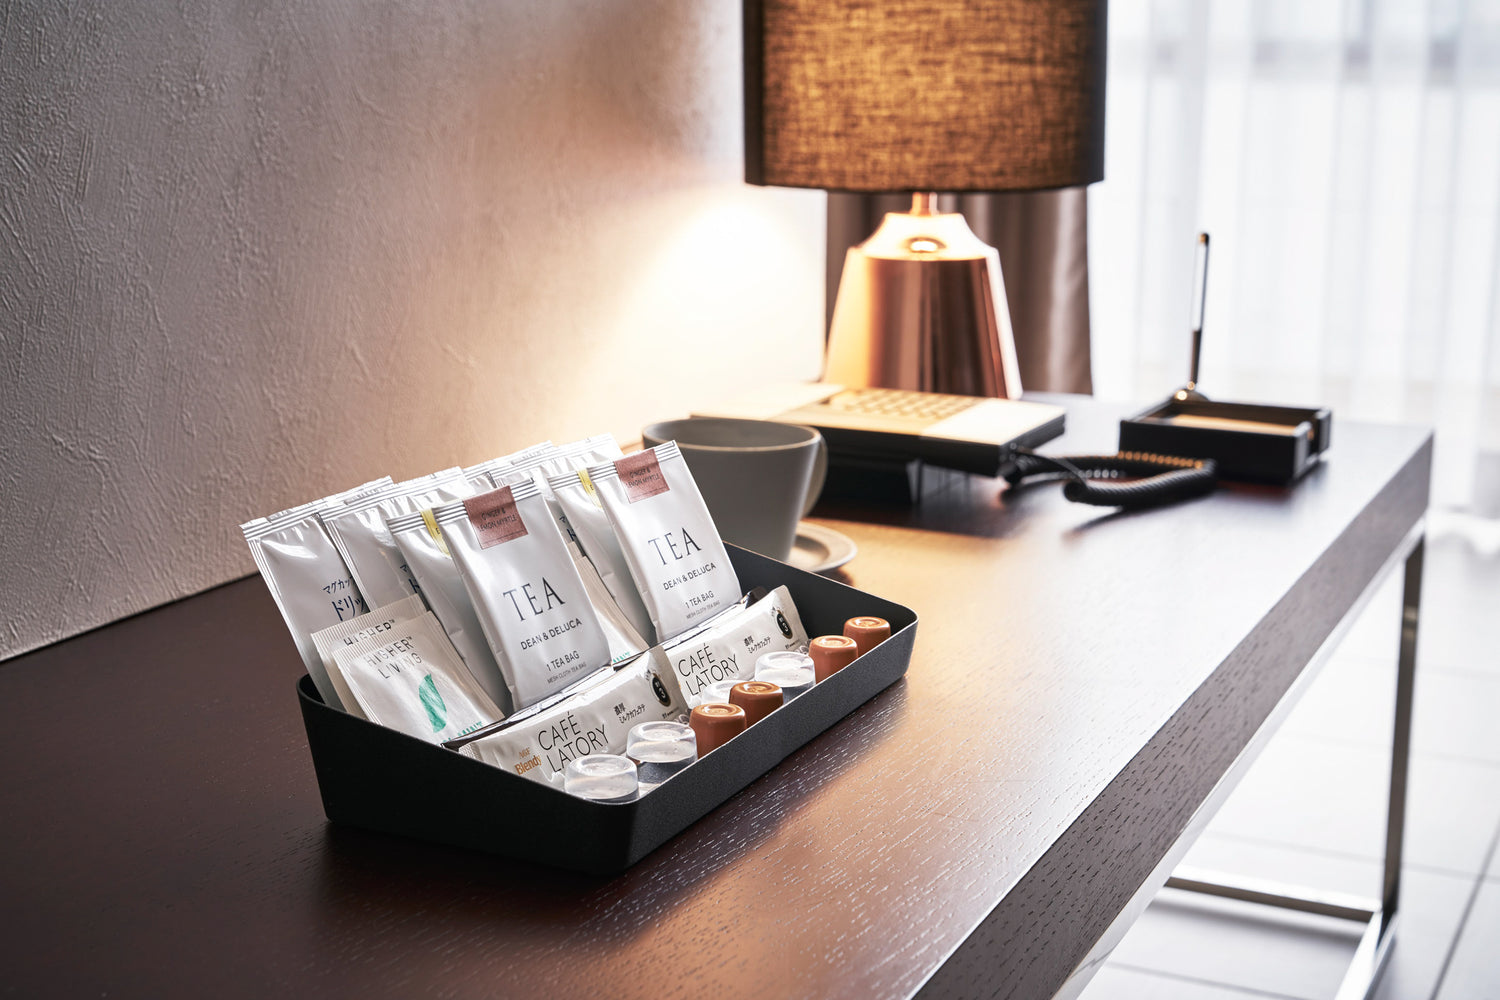 View 16 - Side view of black Accessory Tray holding tea bags and coffee pods on desk by Yamazaki Home.